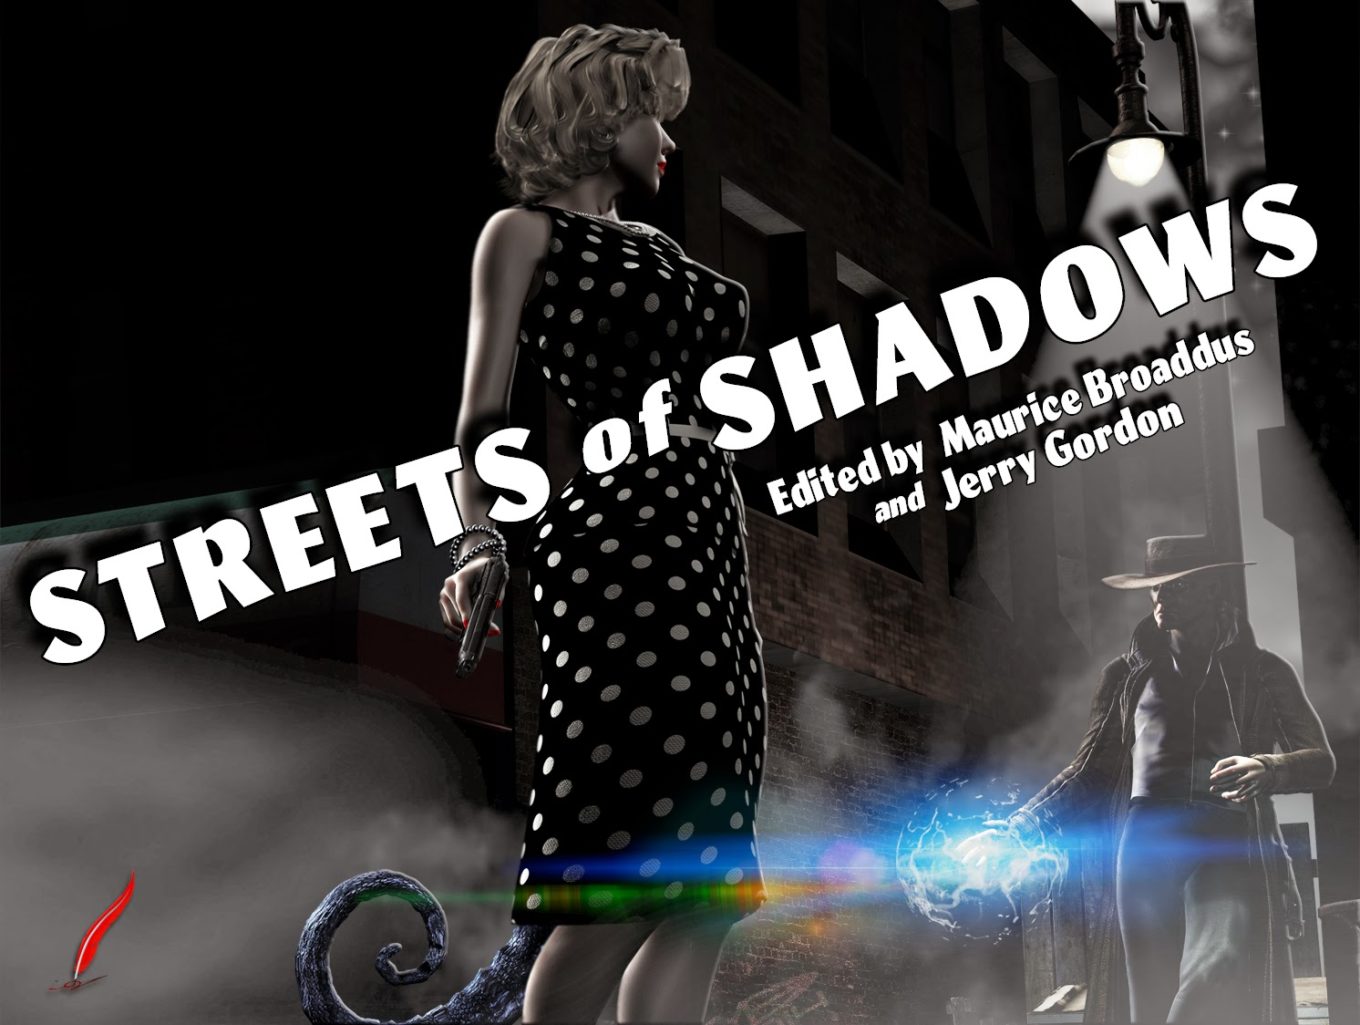 The Kickstarter for Streets of Shadows Is Going On Right Now